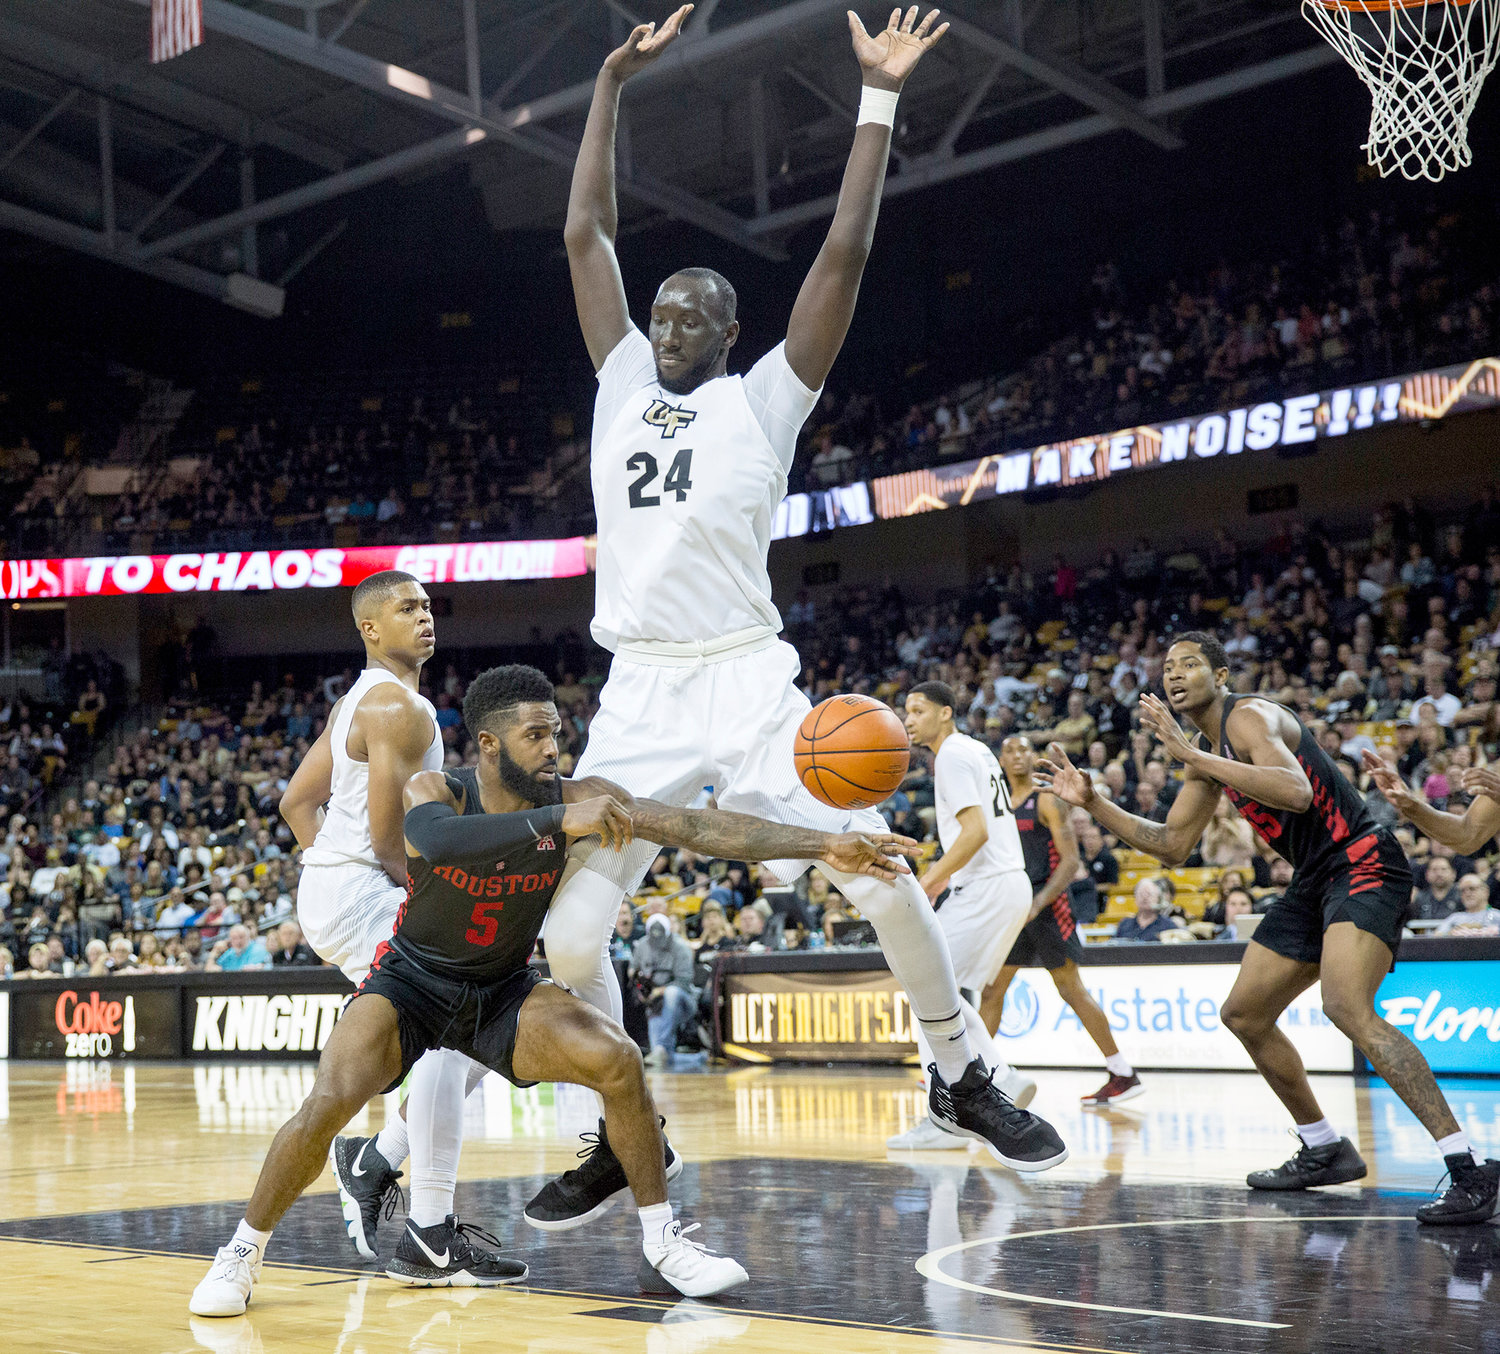 Top-seeded Duke escapes Tacko Fall and UCF by 1 point | The Cleveland